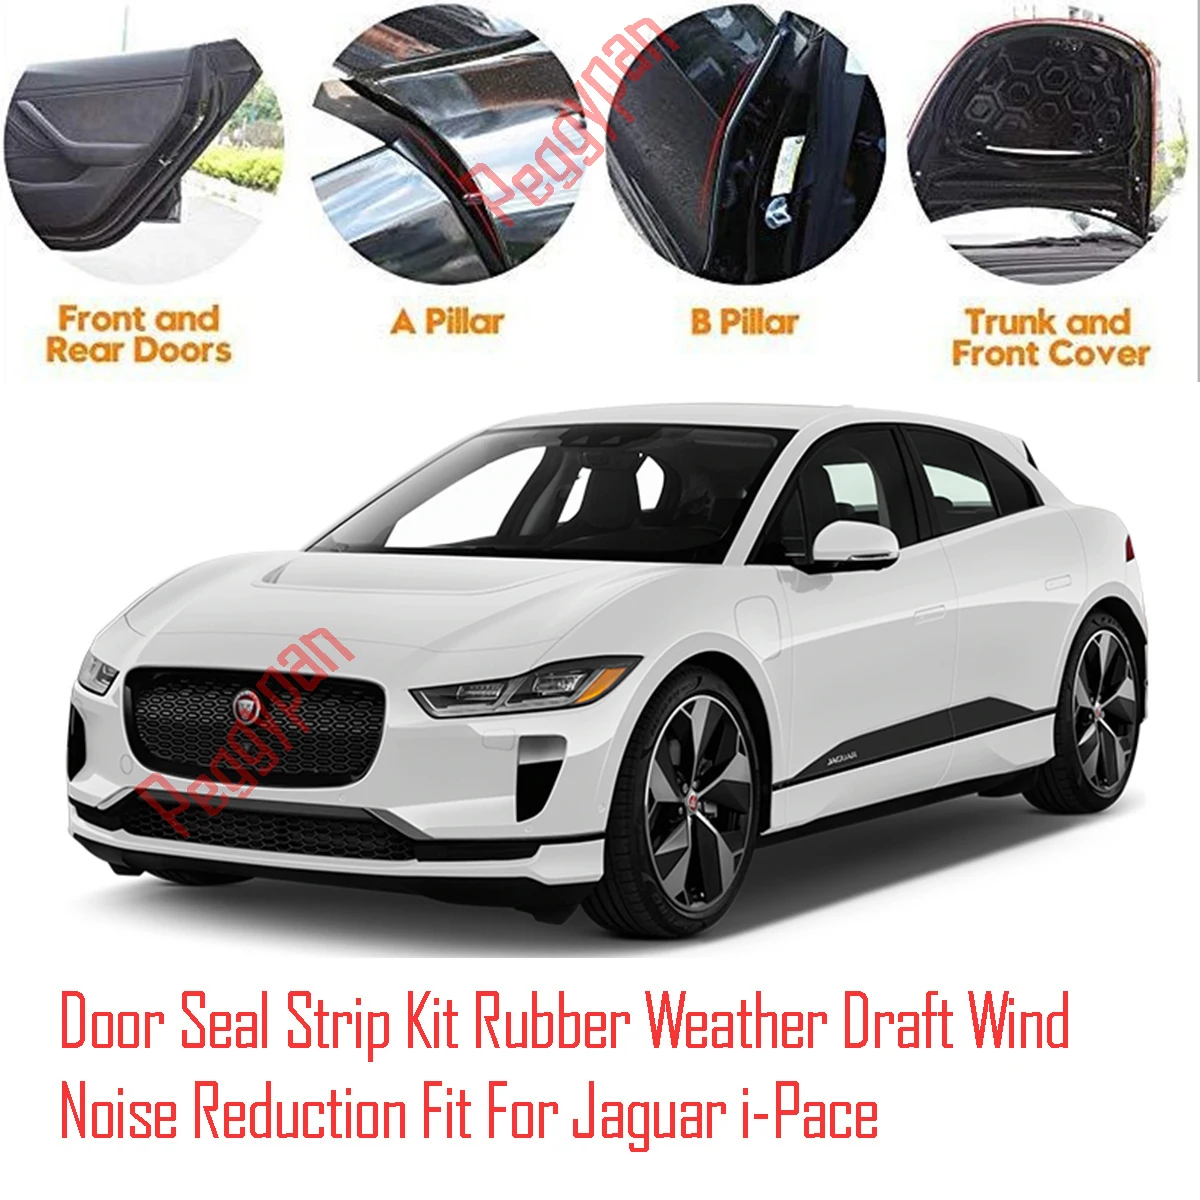 Door Seal Strip Kit Self Adhesive Window Engine Cover Soundproof Rubber Weather Draft Wind Noise Reduction Fit For Jaguar i-Pace